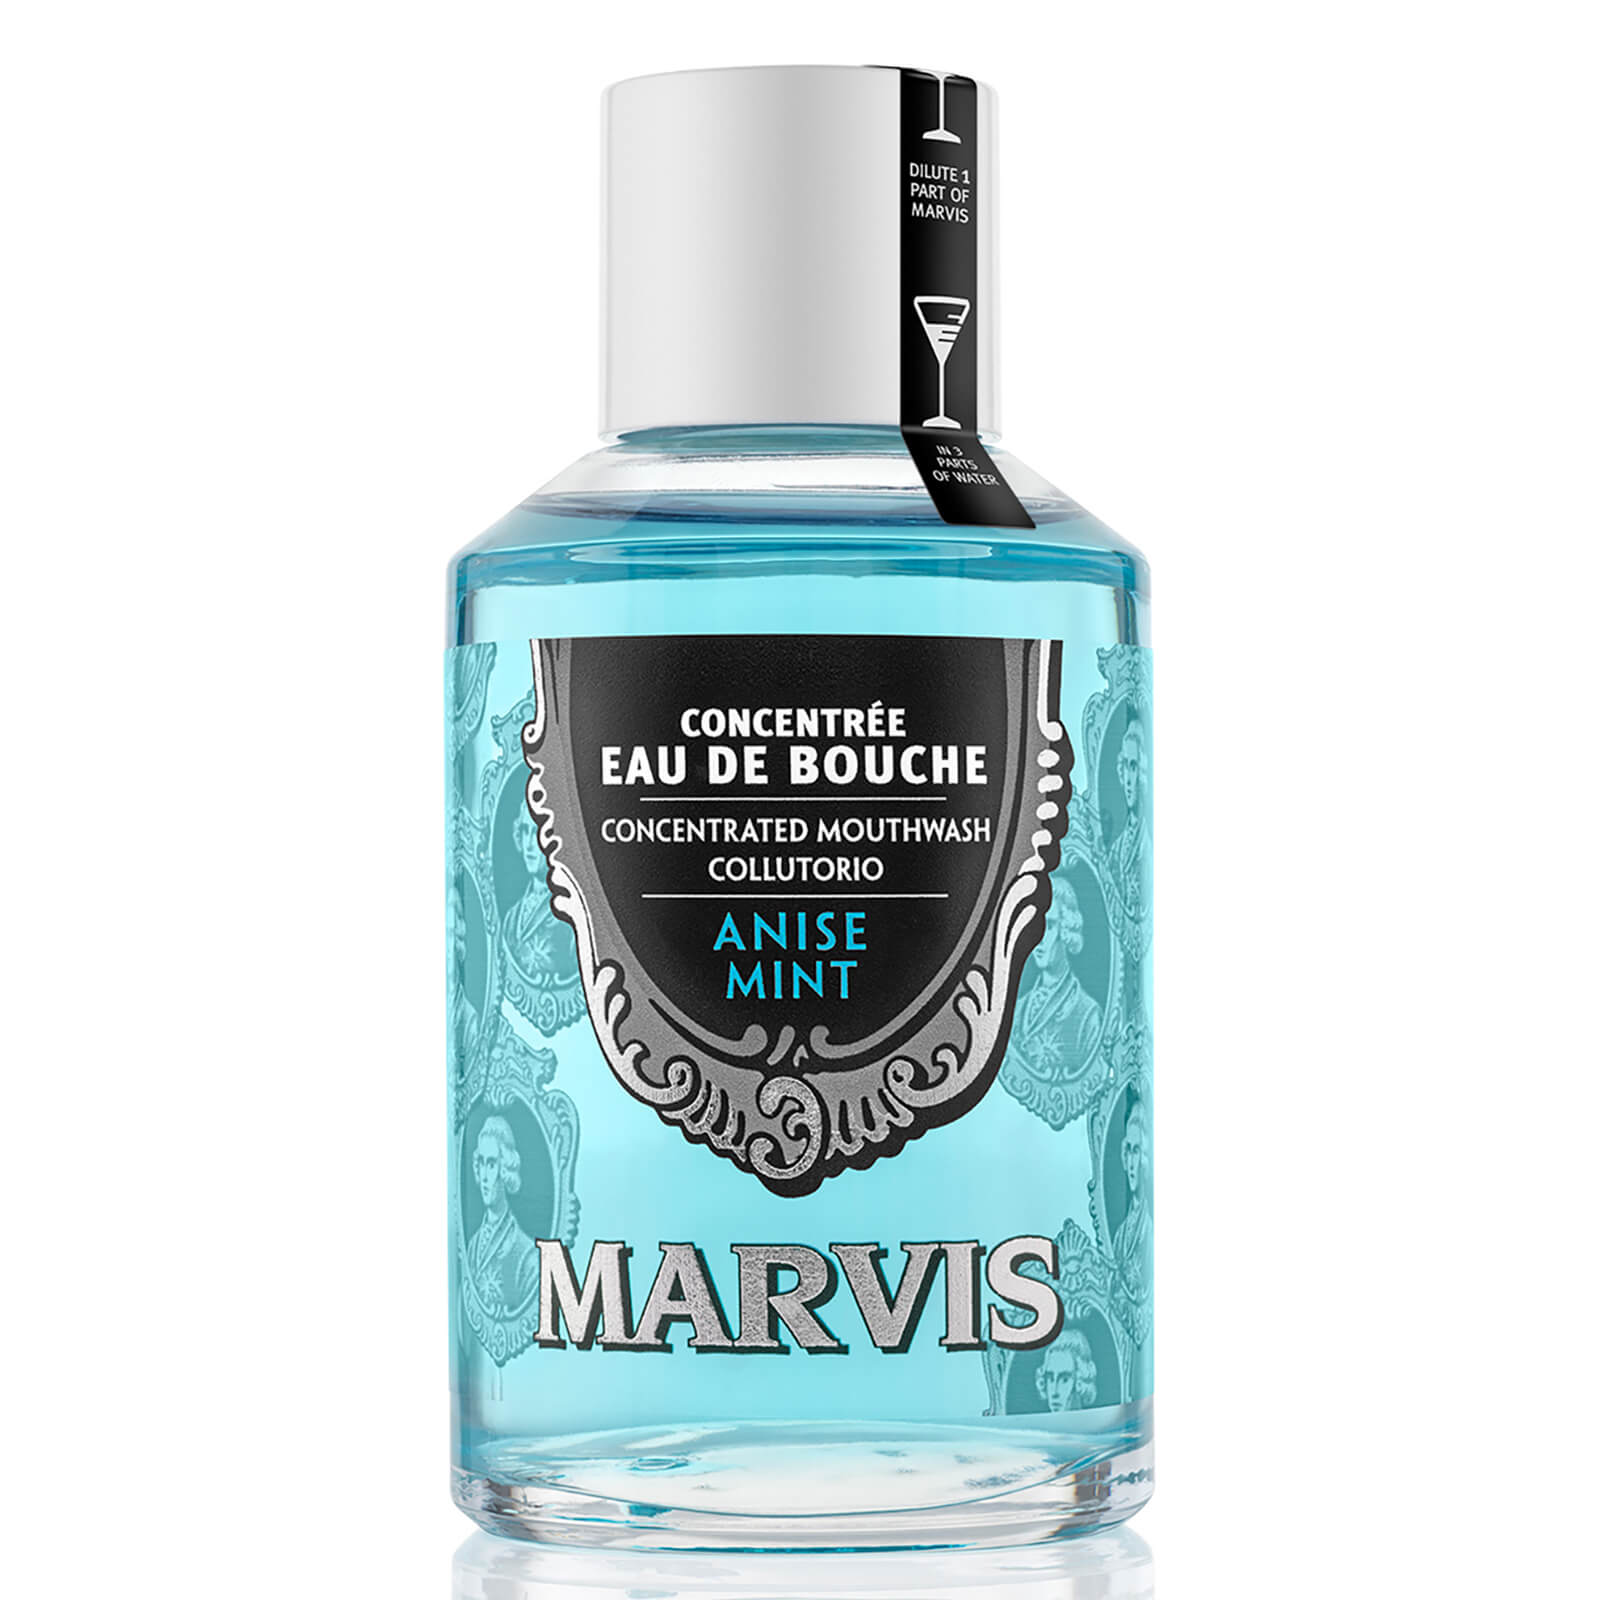 Marvis Concentrated Mouthwash Aniseed Mint 120ml lookfantastic.com imagine